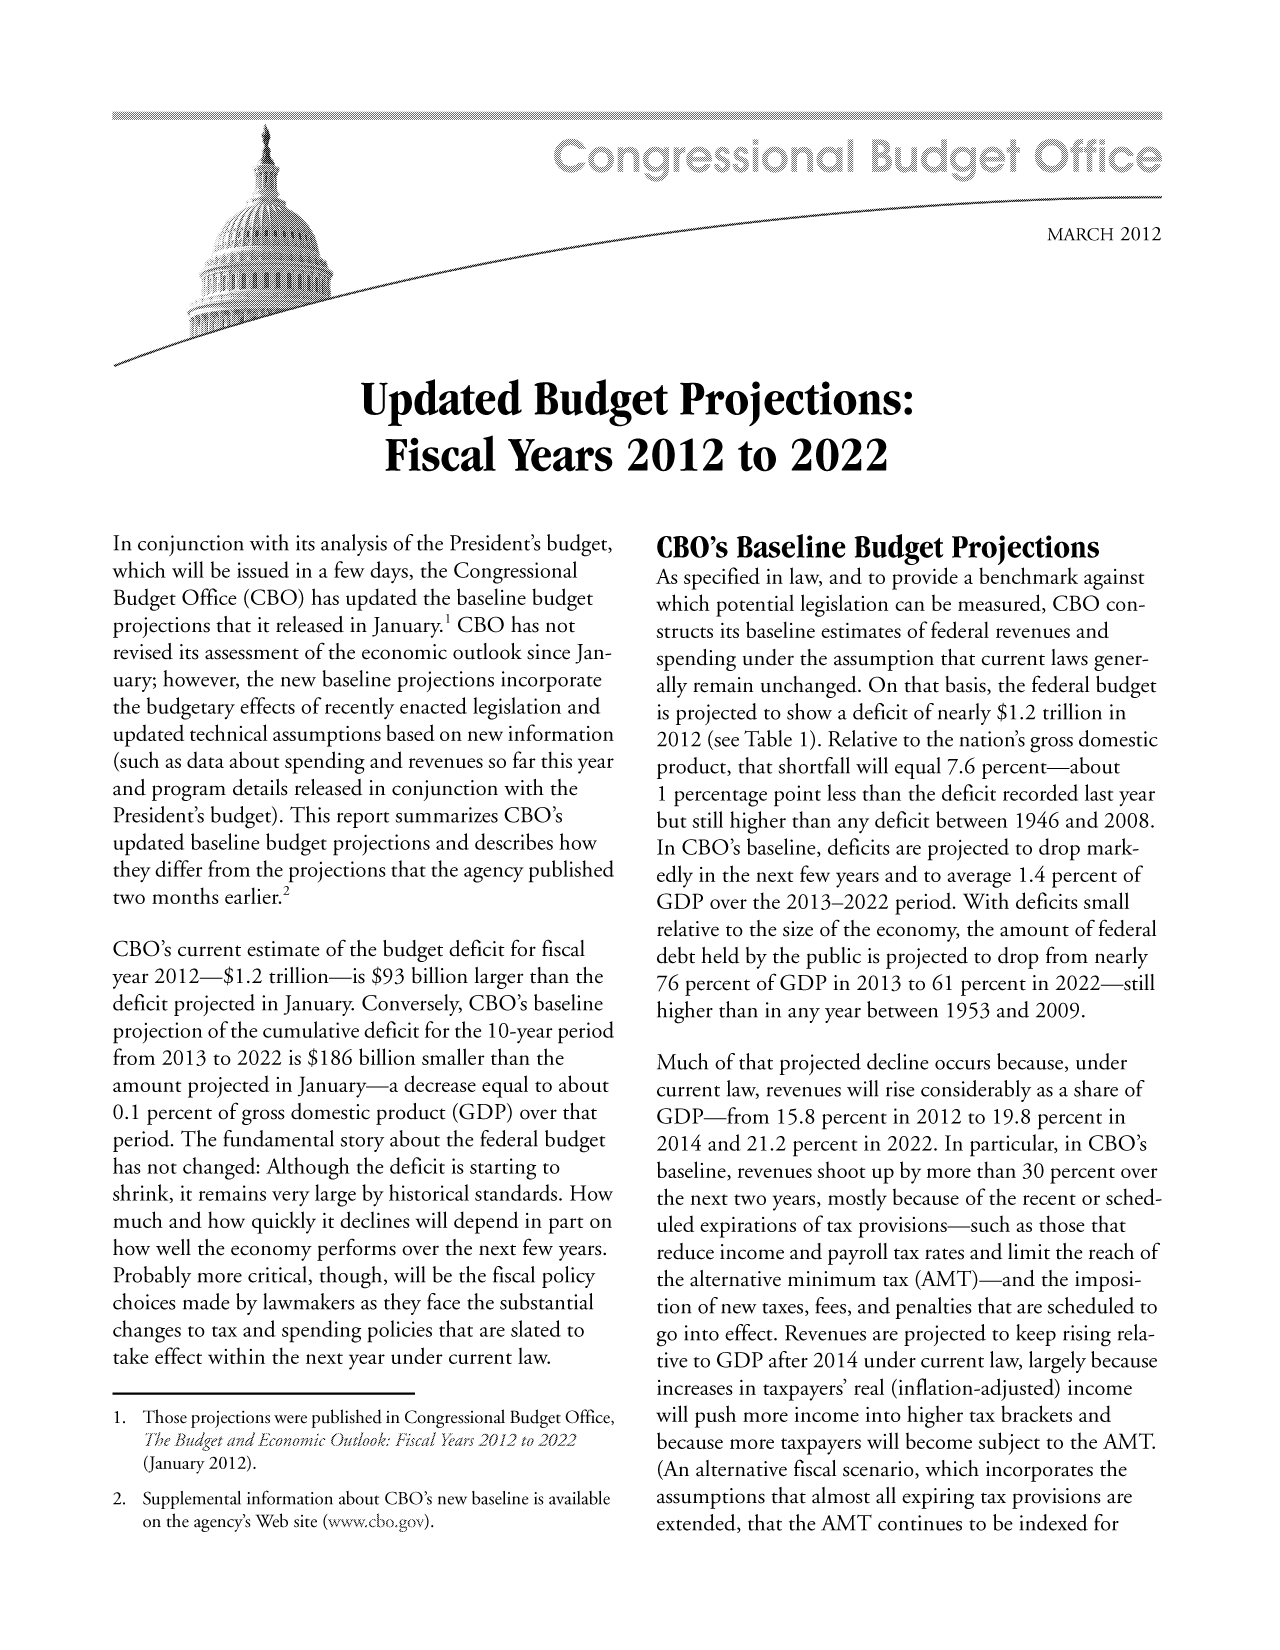 handle is hein.congrec/cbo10659 and id is 1 raw text is: MARCH 2012
Updated Budget Projections:
Fiscal Years 2012 to 2022

In conjunction with its analysis of the President's budget,
which will be issued in a few days, the Congressional
Budget Office (CBO) has updated the baseline budget
projections that it released in January.' CBO has not
revised its assessment of the economic outlook since Jan-
uary; however, the new baseline projections incorporate
the budgetary effects of recently enacted legislation and
updated technical assumptions based on new information
(such as data about spending and revenues so far this year
and program details released in conjunction with the
President's budget). This report summarizes CBO's
updated baseline budget projections and describes how
they differ from the projections that the agency published
two months earlier.2
CBO's current estimate of the budget deficit for fiscal
year 2012-$1.2 trillion-is $93 billion larger than the
deficit projected in January. Conversely, CBO's baseline
projection of the cumulative deficit for the l0-year period
from 2013 to 2022 is $186 billion smaller than the
amount projected in January-a decrease equal to about
0.1 percent of gross domestic product (GDP) over that
period. The fundamental story about the federal budget
has not changed: Although the deficit is starting to
shrink, it remains very large by historical standards. How
much and how quickly it declines will depend in part on
how well the economy performs over the next few years.
Probably more critical, though, will be the fiscal policy
choices made by lawmakers as they face the substantial
changes to tax and spending policies that are slated to
take effect within the next year under current law.
1. Those projections were published in Congressional Budget Office,
The Budget and E1fconomlic Outlook: Fiscal 1ars 2012 to 2022
(January 2012).
2. Supplemental information about CBO's new baseline is available
on the agency's Web site (ww.cbo.gov).

CBO's Baseline Budget Projections
As specified in law, and to provide a benchmark against
which potential legislation can be measured, CBO con-
structs its baseline estimates of federal revenues and
spending under the assumption that current laws gener-
ally remain unchanged. On that basis, the federal budget
is projected to show a deficit of nearly $1.2 trillion in
2012 (see Table 1). Relative to the nation's gross domestic
product, that shortfall will equal 7.6 percent-about
1 percentage point less than the deficit recorded last year
but still higher than any deficit between 1946 and 2008.
In CBO's baseline, deficits are projected to drop mark-
edly in the next few years and to average 1.4 percent of
GDP over the 2013-2022 period. With deficits small
relative to the size of the economy, the amount of federal
debt held by the public is projected to drop from nearly
76 percent of GDP in 2013 to 61 percent in 2022-still
higher than in any year between 1953 and 2009.
Much of that projected decline occurs because, under
current law, revenues will rise considerably as a share of
GDP-from 15.8 percent in 2012 to 19.8 percent in
2014 and 21.2 percent in 2022. In particular, in CBO's
baseline, revenues shoot up by more than 30 percent over
the next two years, mostly because of the recent or sched-
uled expirations of tax provisions-such as those that
reduce income and payroll tax rates and limit the reach of
the alternative minimum tax (AMT)-and the imposi-
tion of new taxes, fees, and penalties that are scheduled to
go into effect. Revenues are projected to keep rising rela-
tive to GDP after 2014 under current law, largely because
increases in taxpayers' real (inflation-adjusted) income
will push more income into higher tax brackets and
because more taxpayers will become subject to the AMT.
(An alternative fiscal scenario, which incorporates the
assumptions that almost all expiring tax provisions are
extended, that the AMT continues to be indexed for


